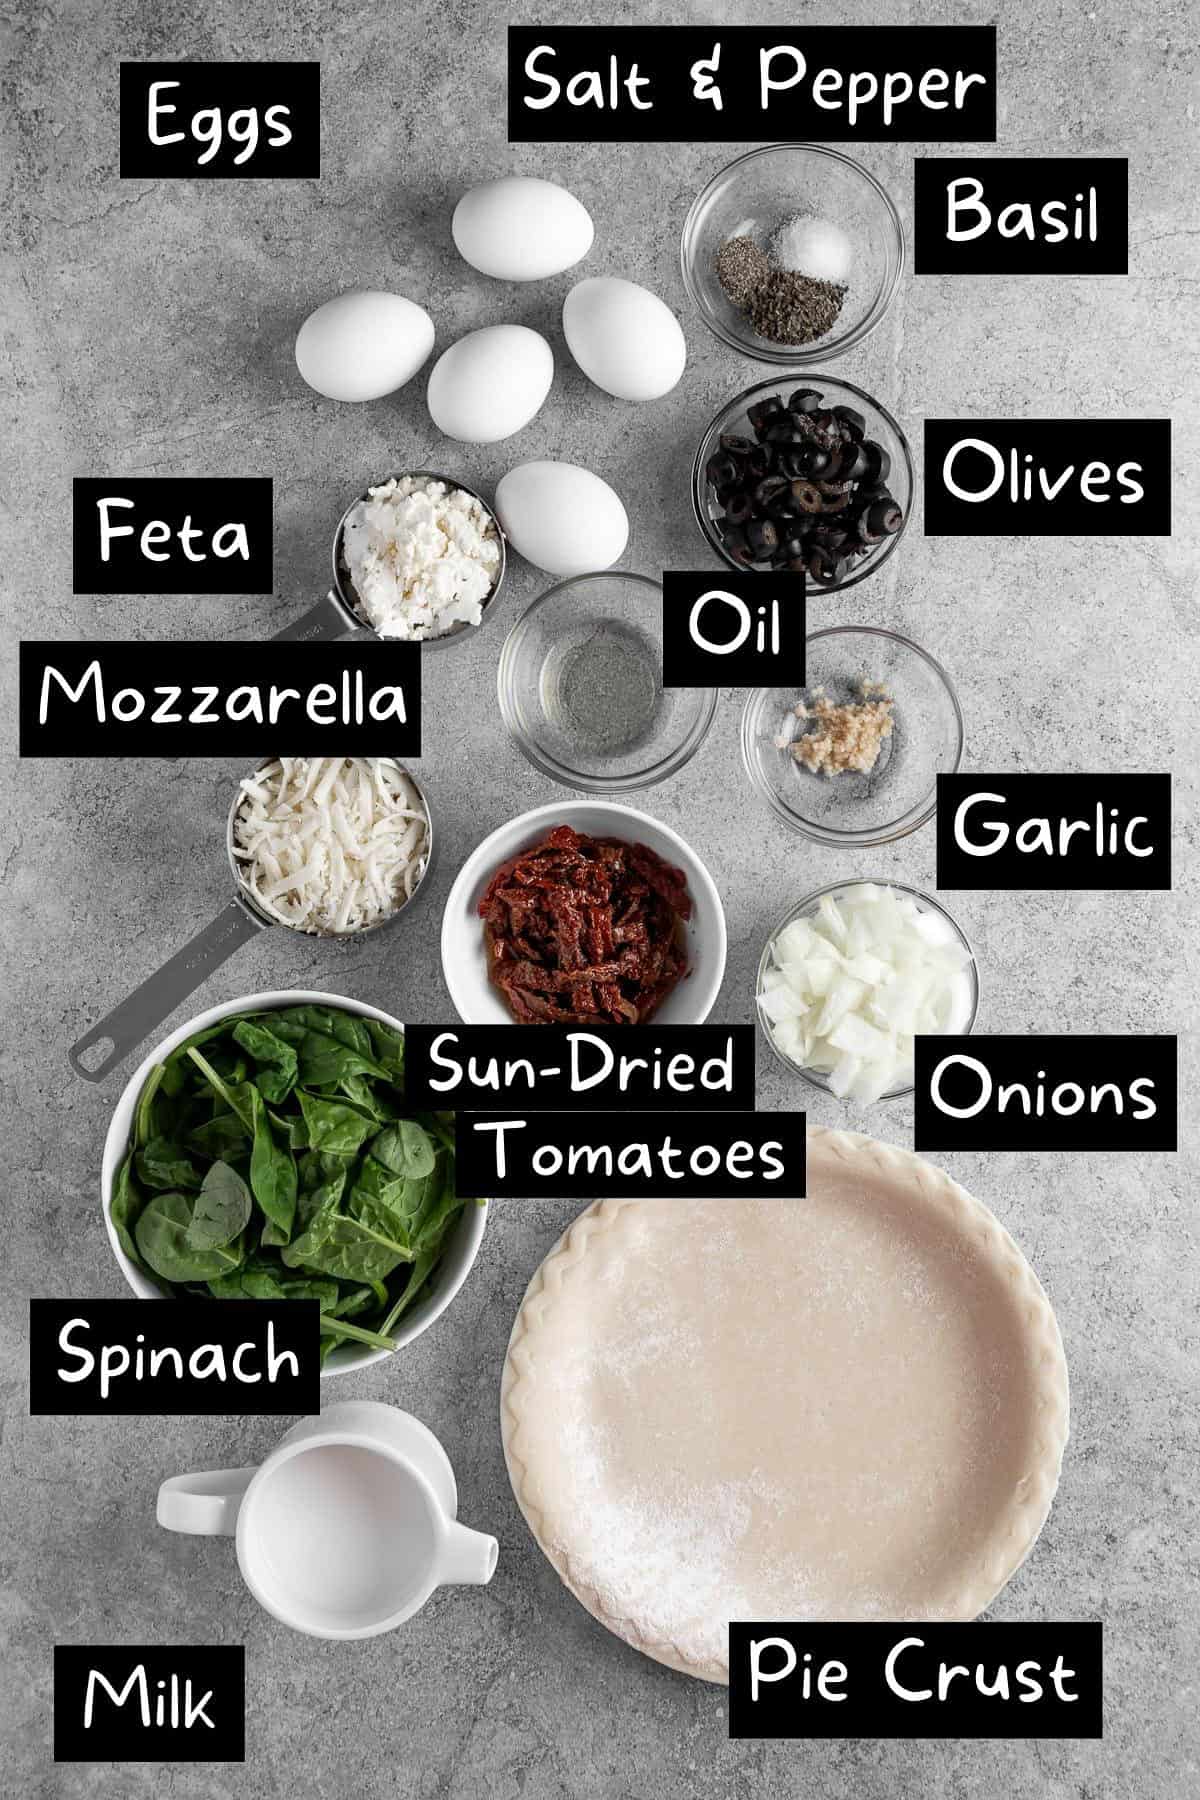 The ingredients needed to make the quiche.